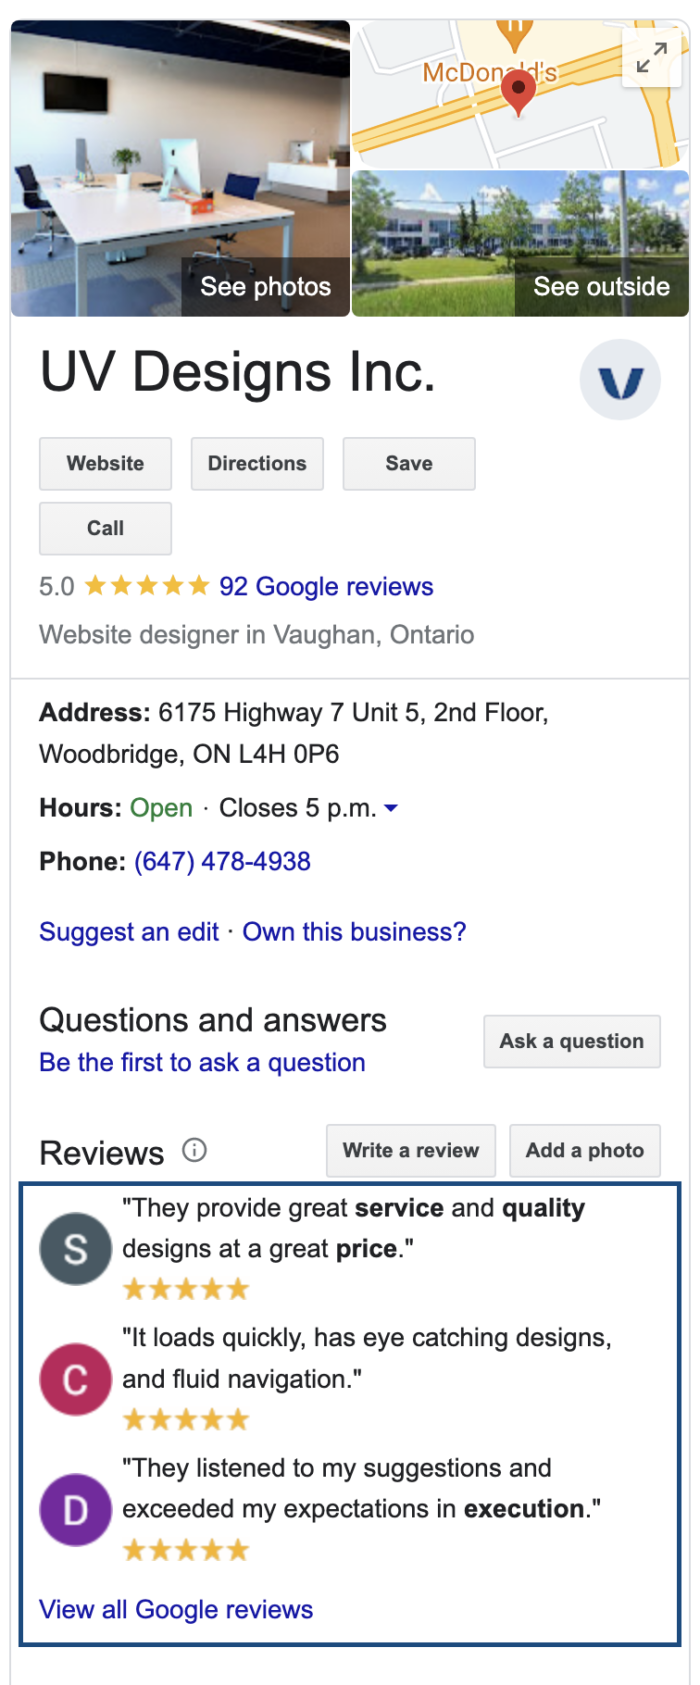 Google Business Profile showing information and Google Reviews